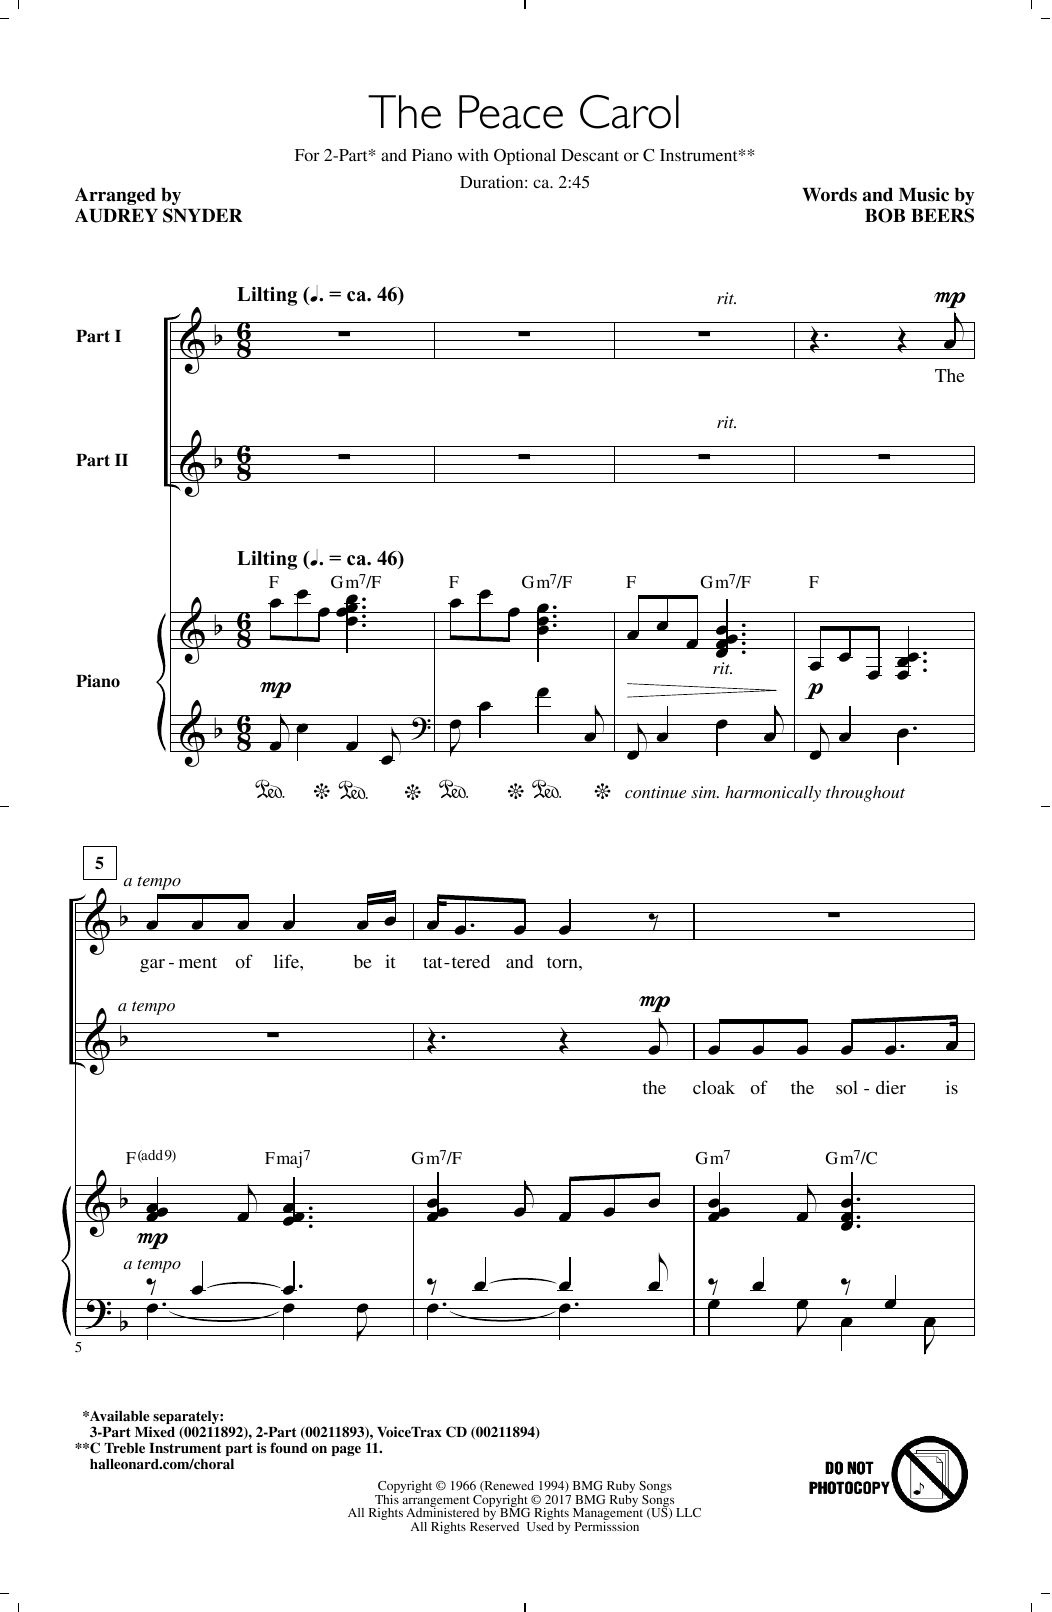 Download Audrey Snyder The Peace Carol Sheet Music